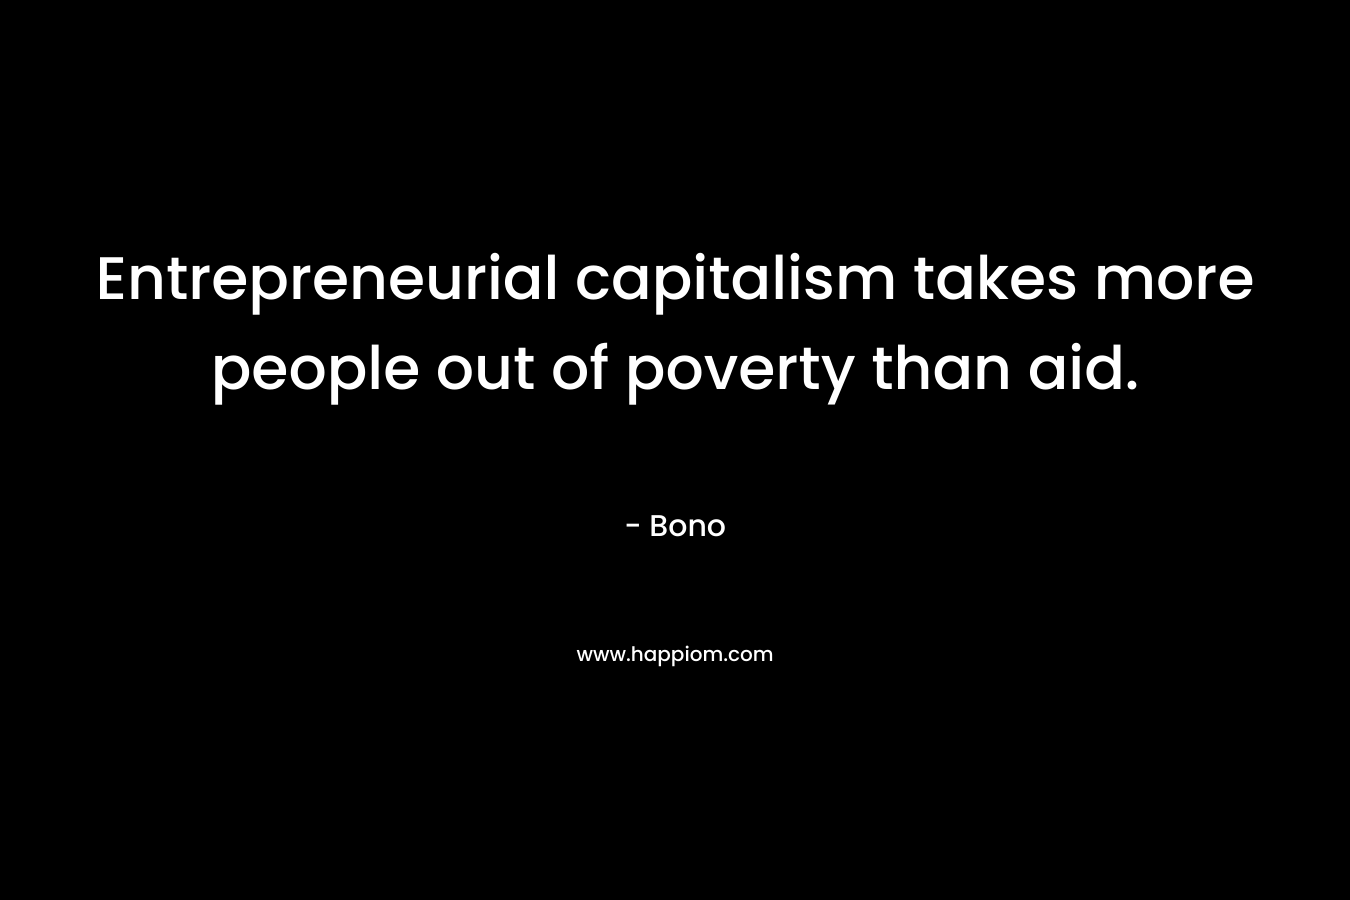 Entrepreneurial capitalism takes more people out of poverty than aid. – Bono